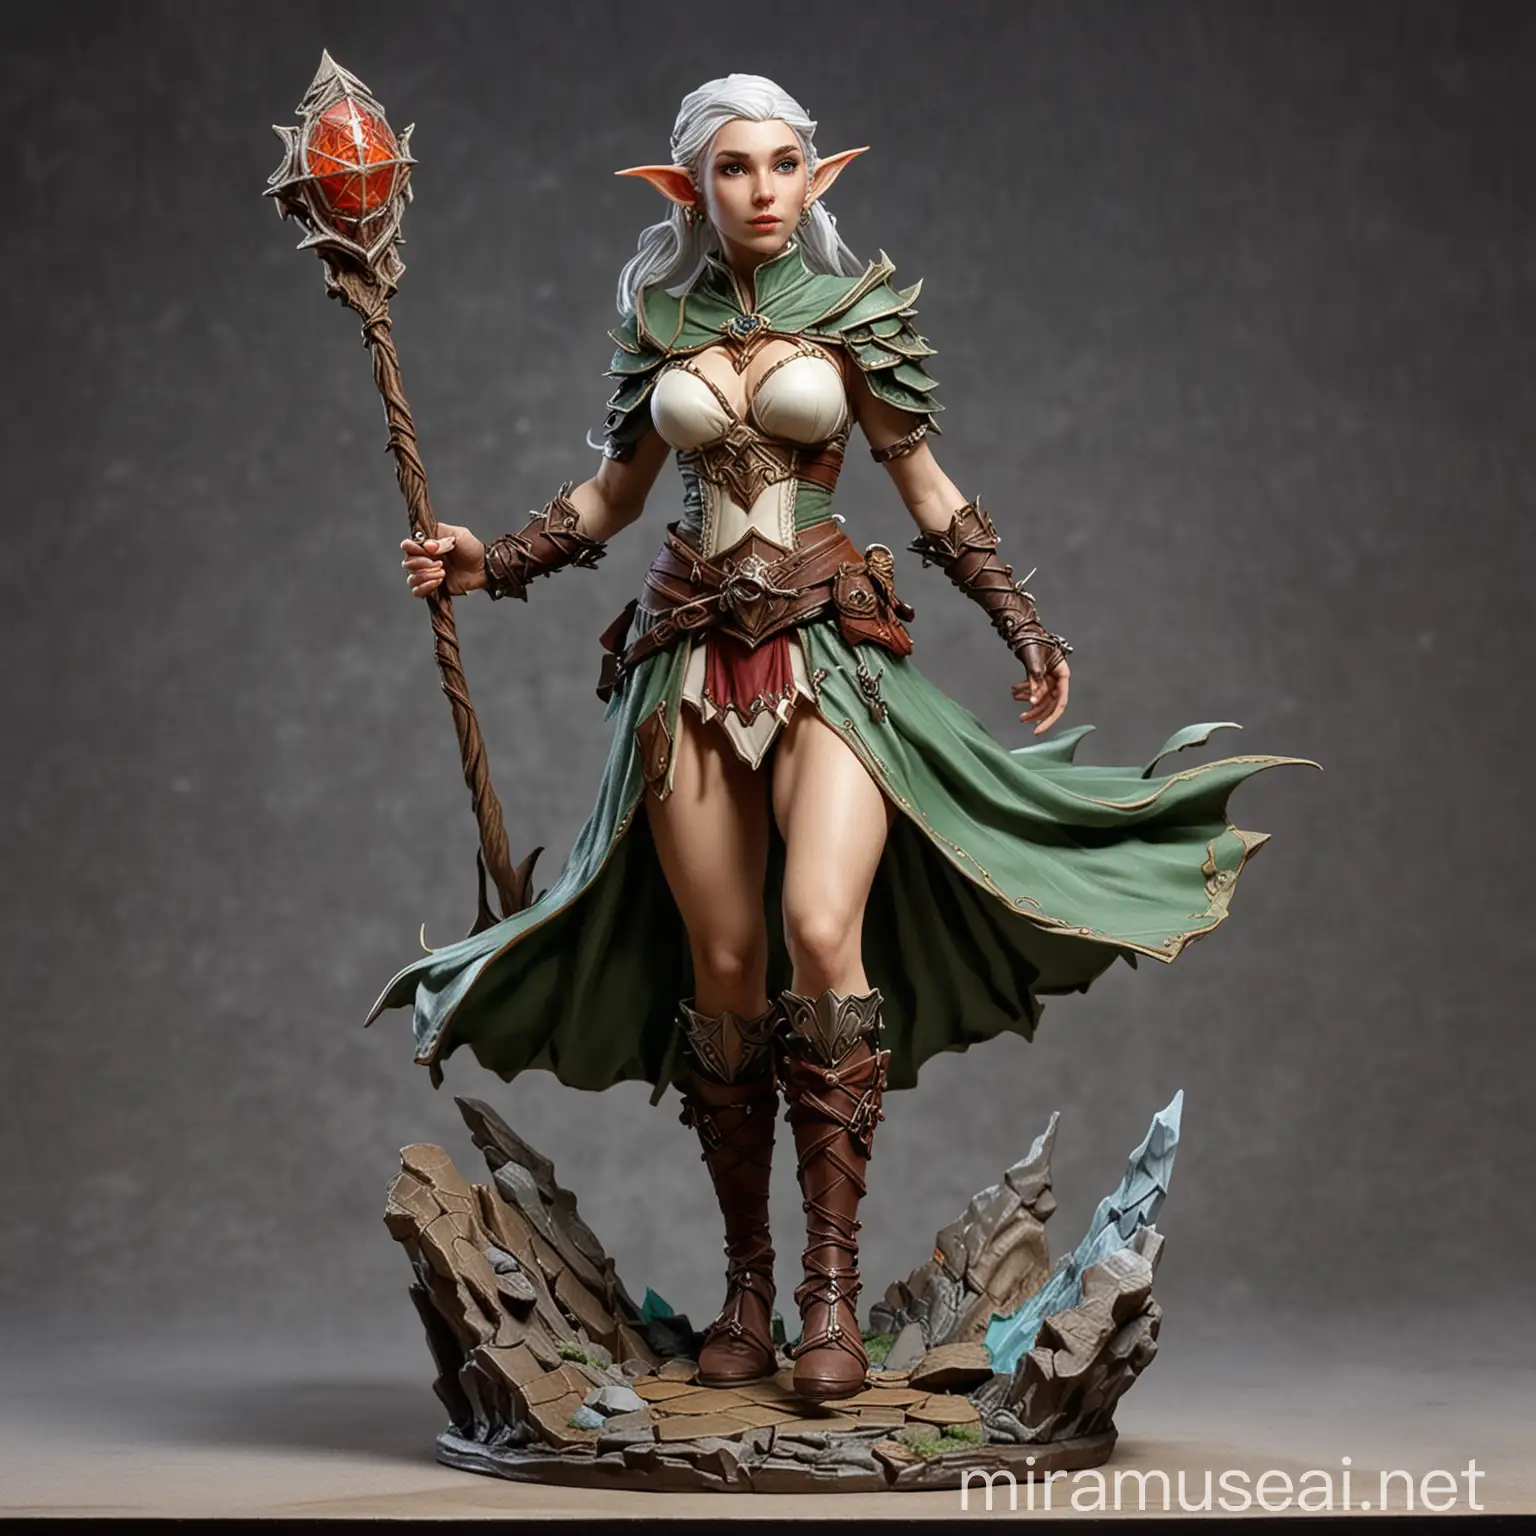 Fantasy Elf Woman Mage Casting Spell in Dungeon Setting